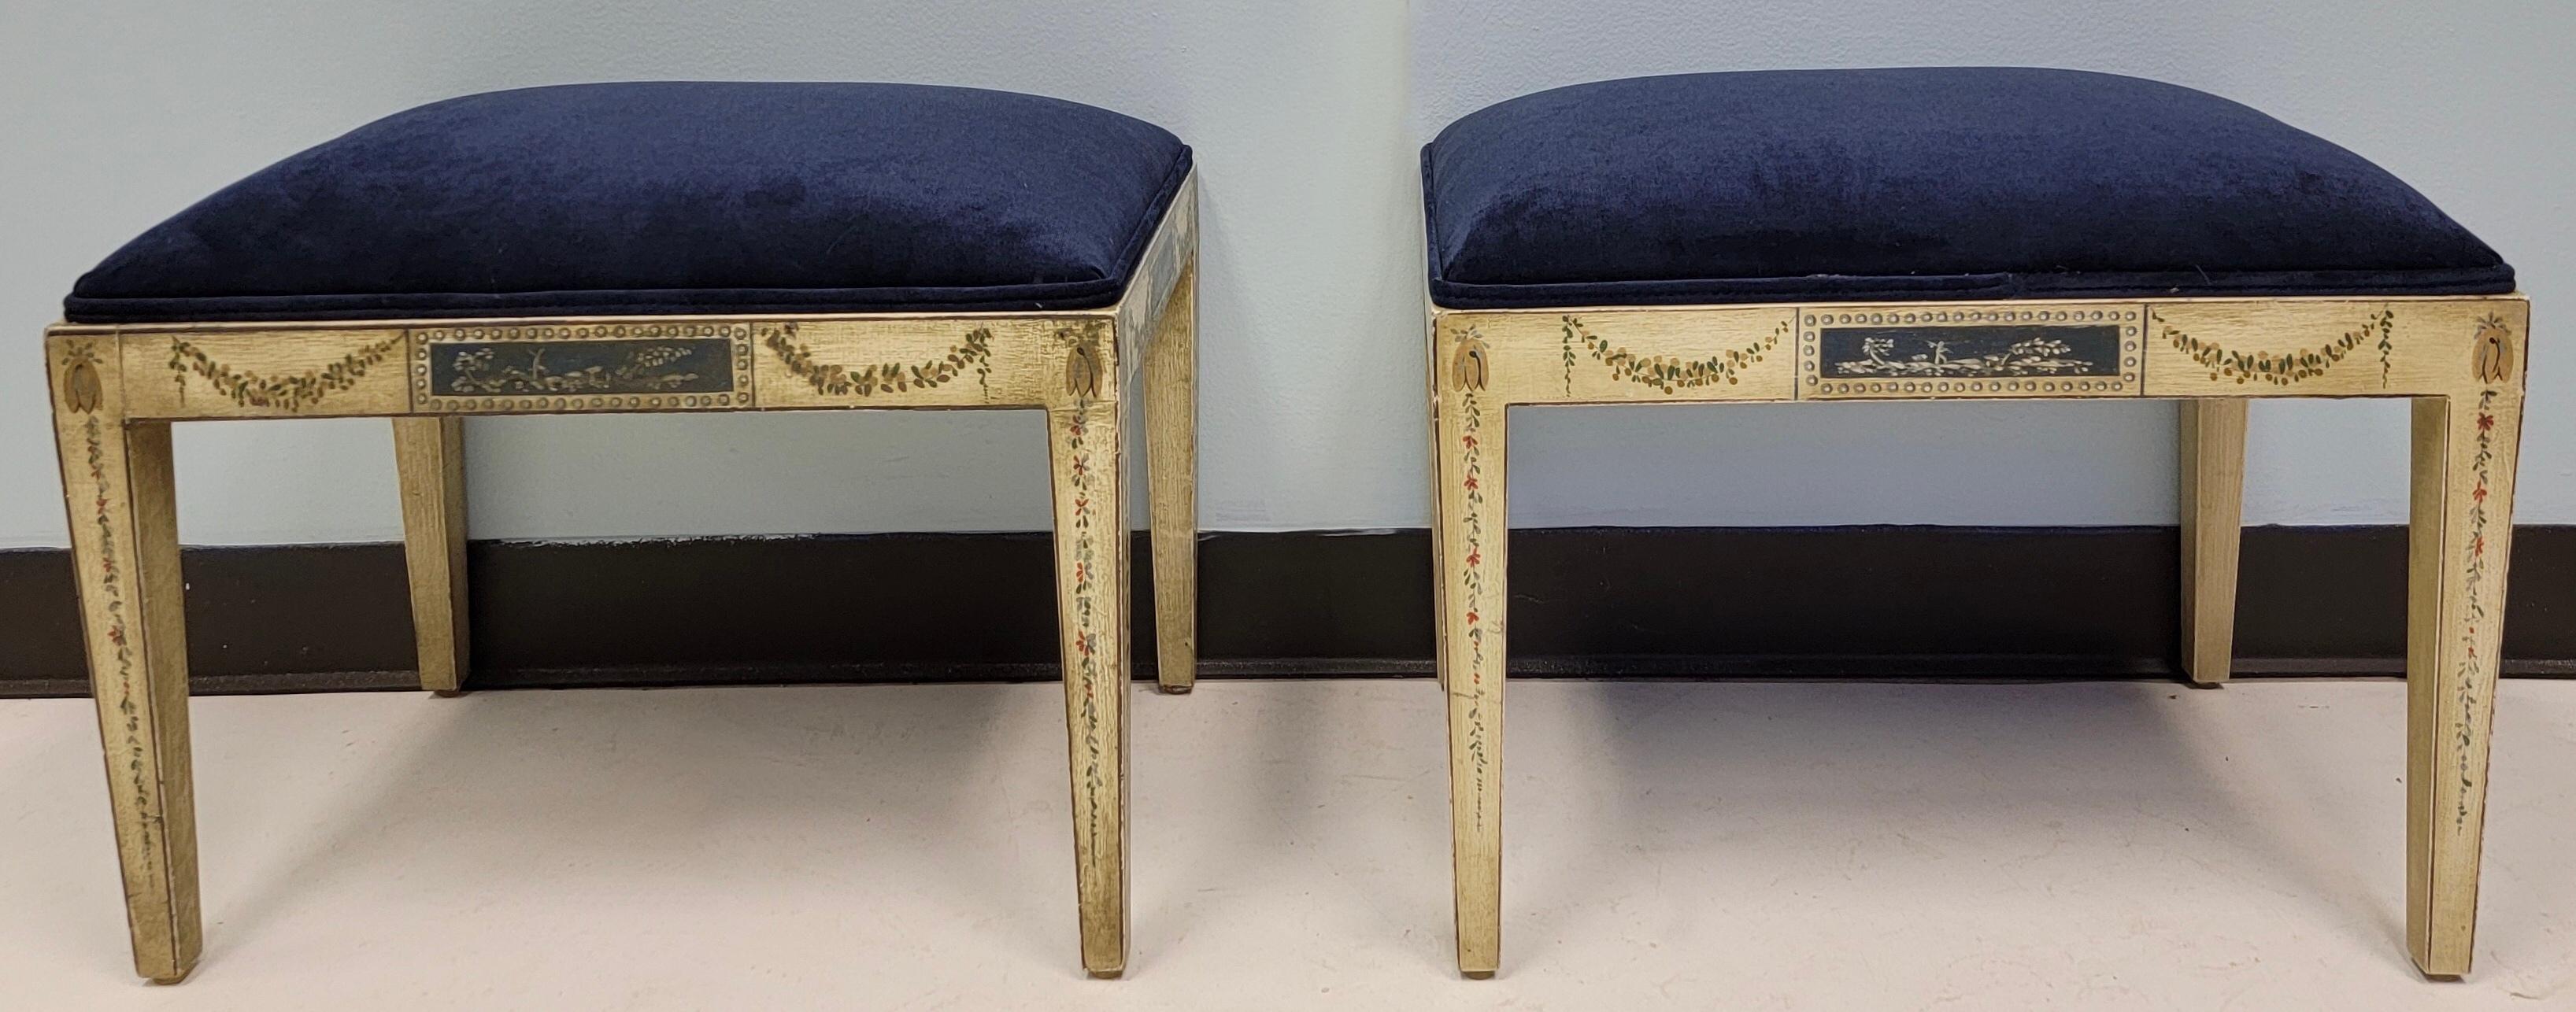 This is a pair of early 20th century pair of French neo-classical style pair of painted ottomans. They were originally petite tables, but I had them converted to ottomans with the addition of the indigo blue velvet.